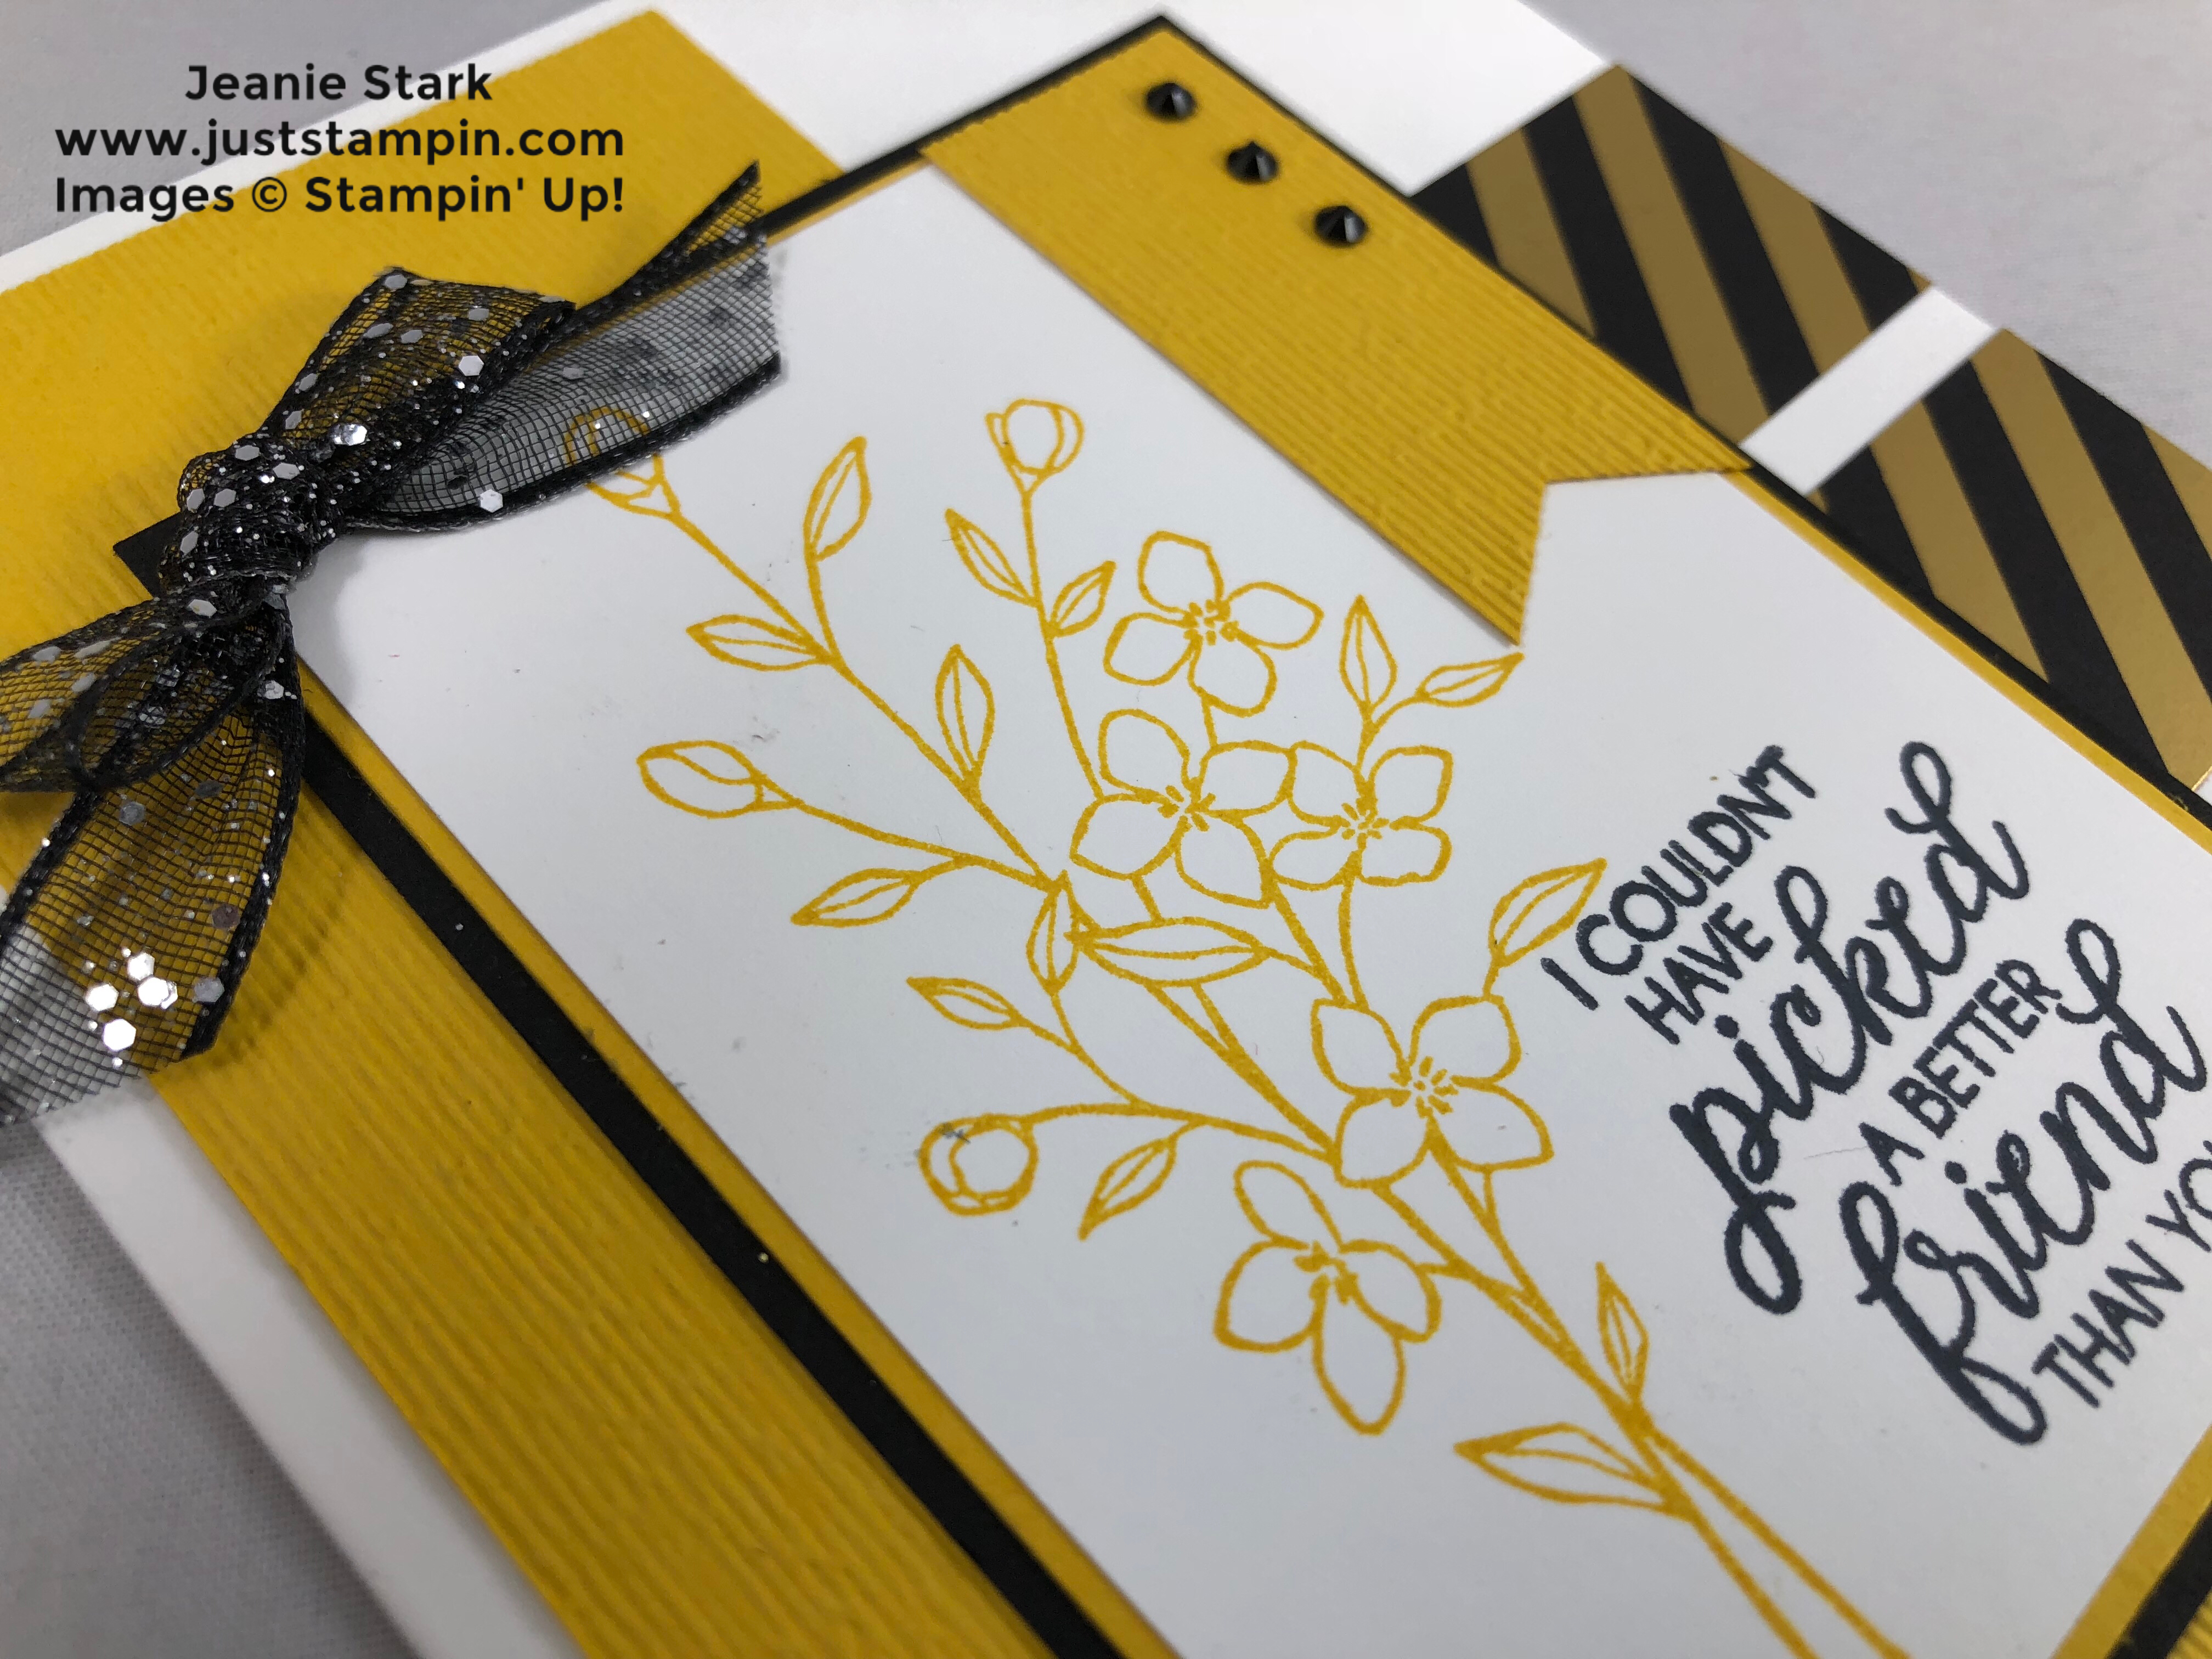 Stampin Up Touches of Texture and Subtle embossed card idea for a friend- Jeanie Stark StampinUp